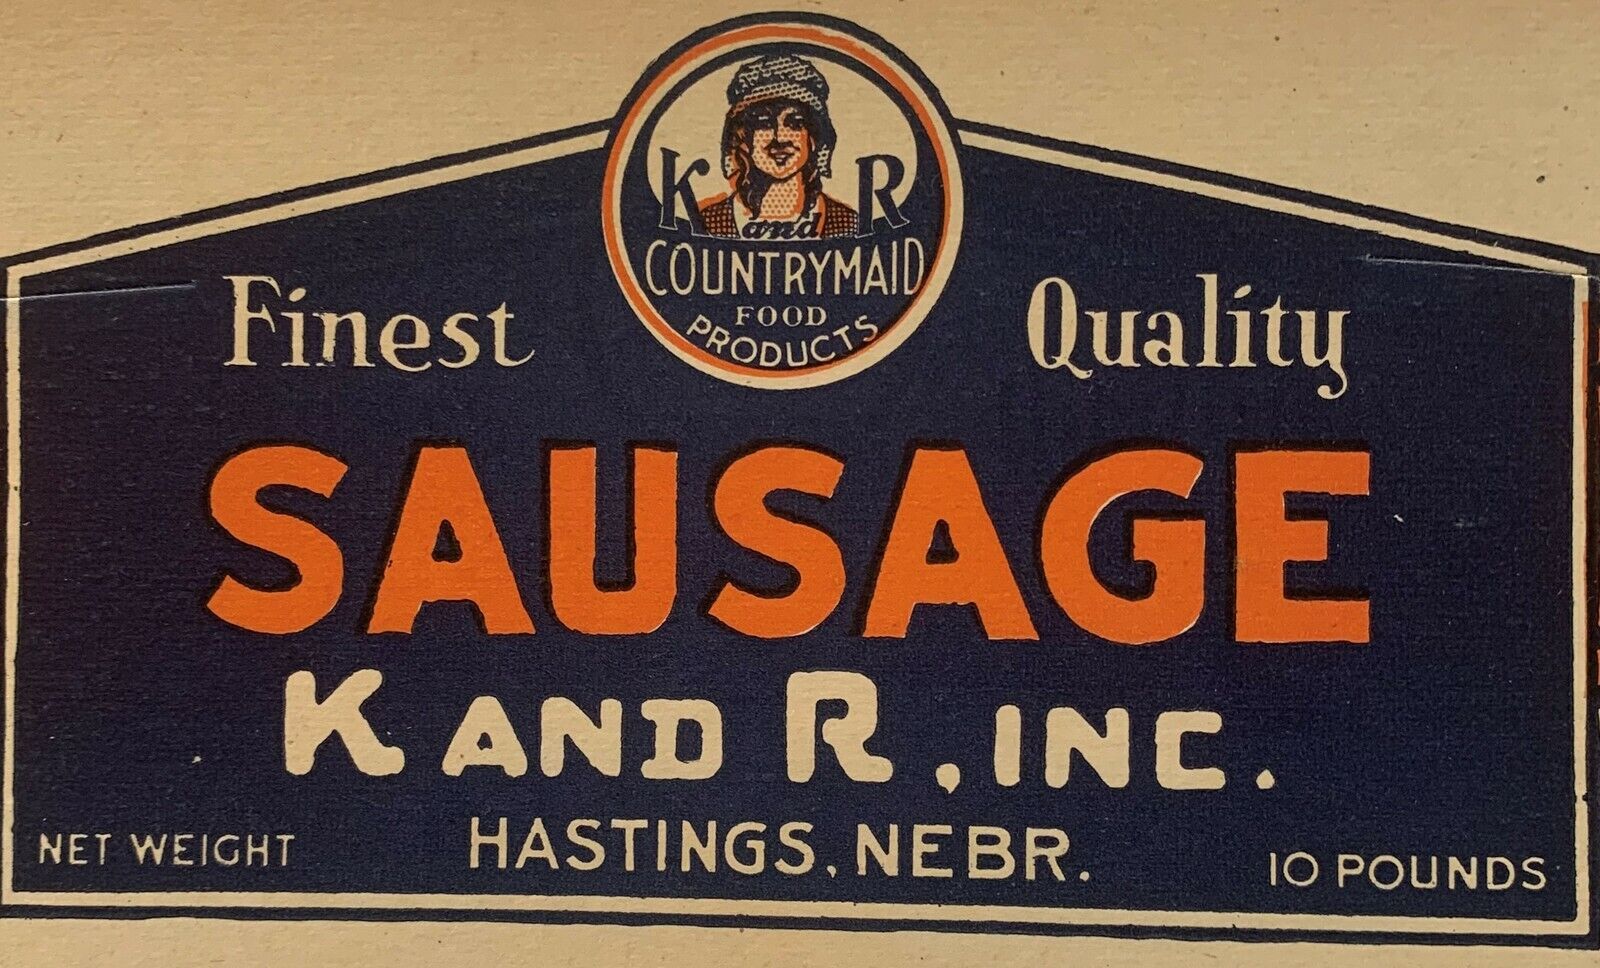 Antique 1920s K and R Countrymaid Sausage Sign - Store Display Hastings, NE